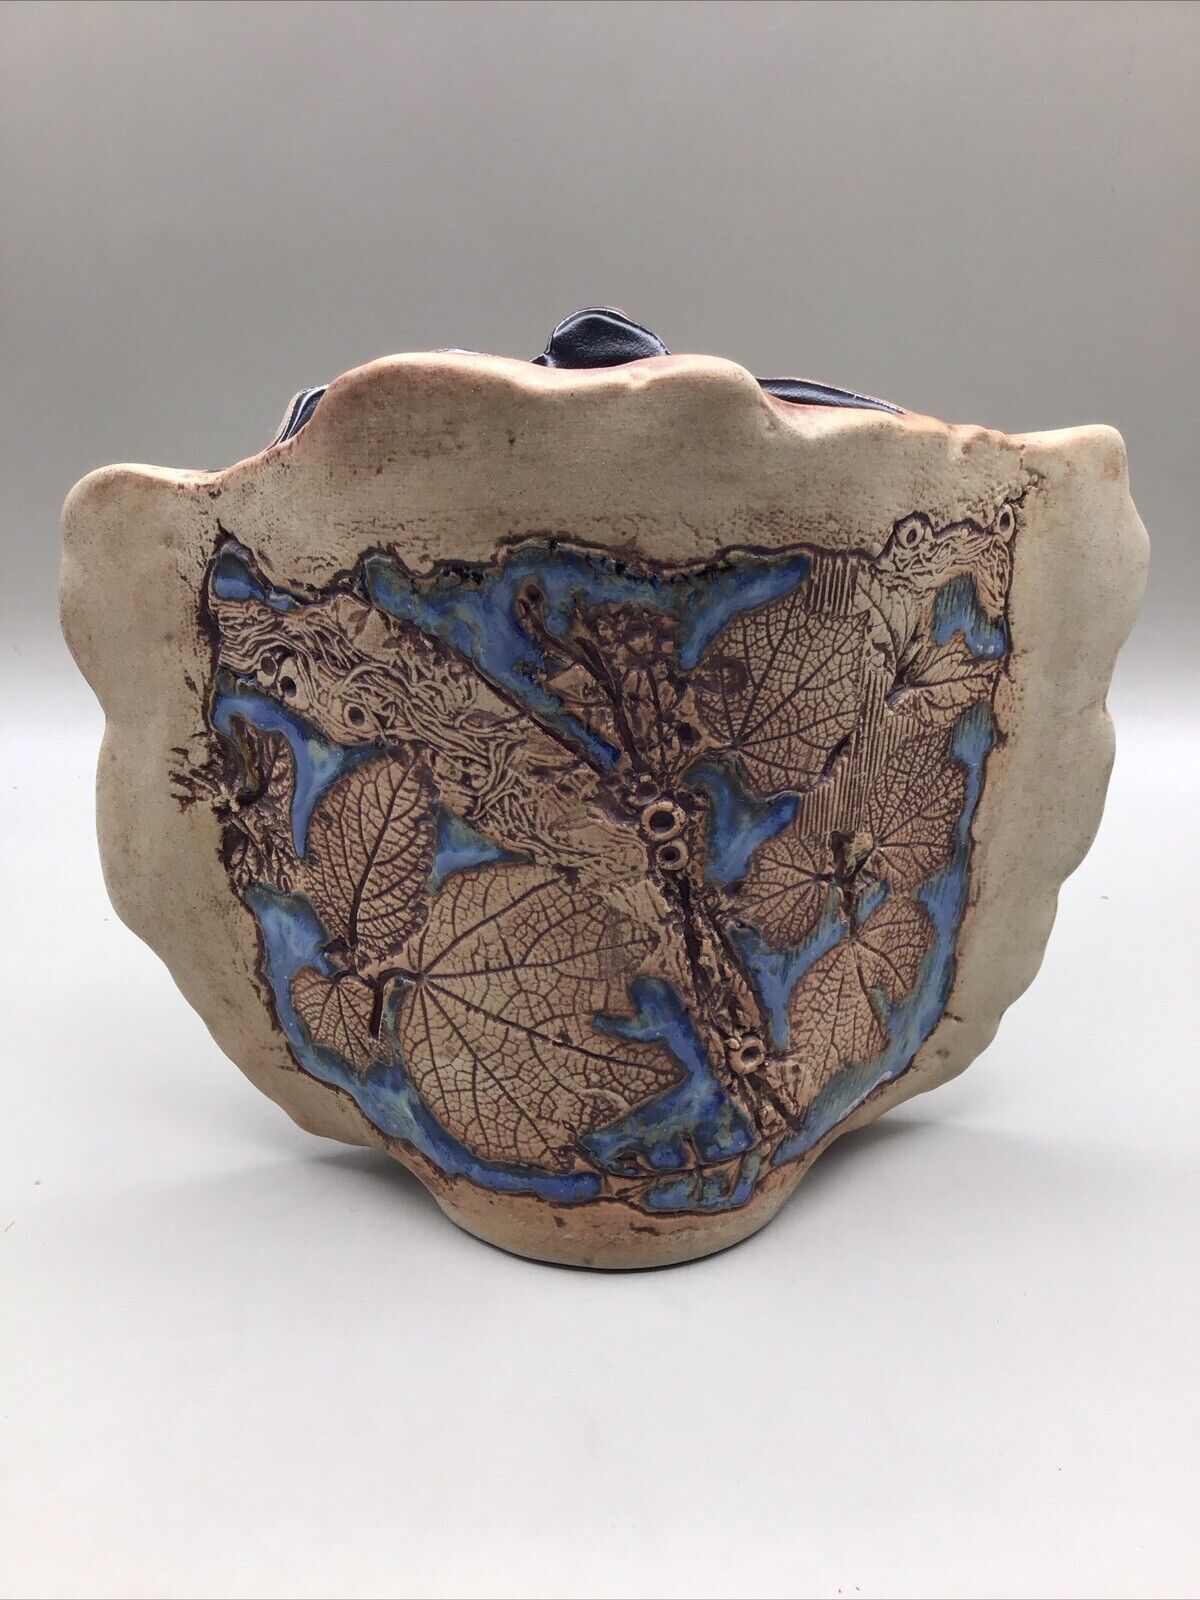 Vintage Pottery Tenmoku Vase Leaves With Ceramic Blue Accents. Malaysia, 6” Tall